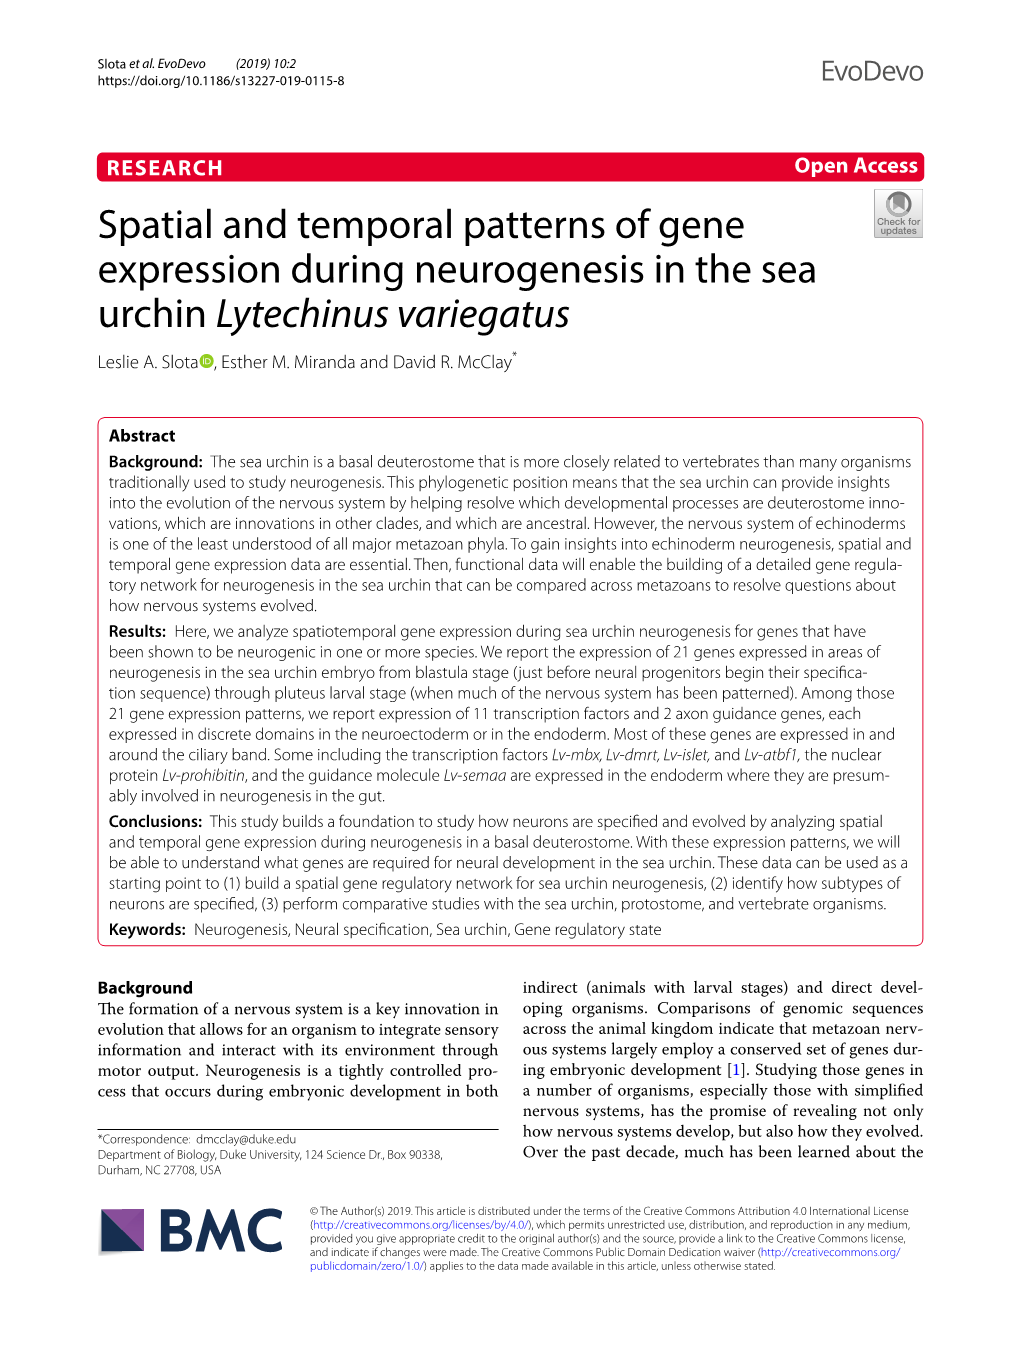 Spatial and Temporal Patterns of Gene Expression During Neurogenesis in the Sea Urchin Lytechinus Variegatus Leslie A